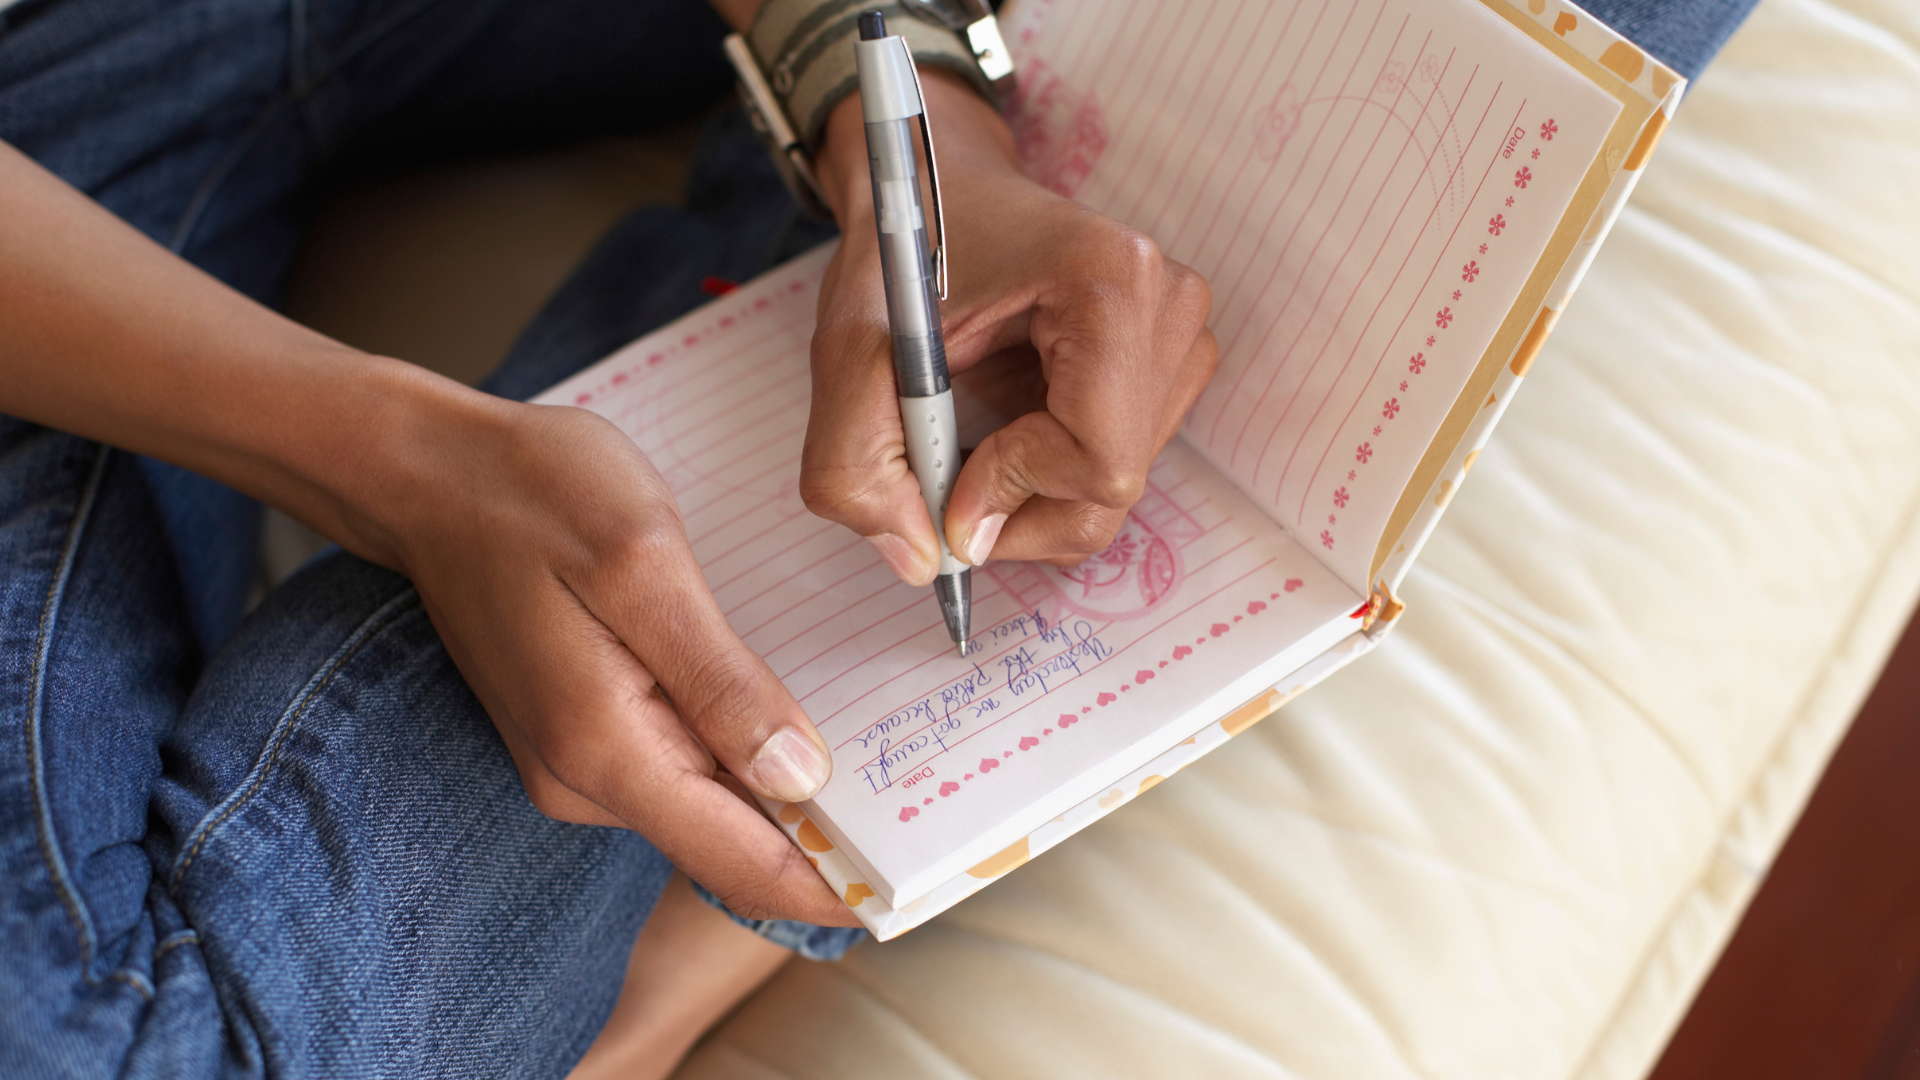 An image showing a woman writing in a journal.